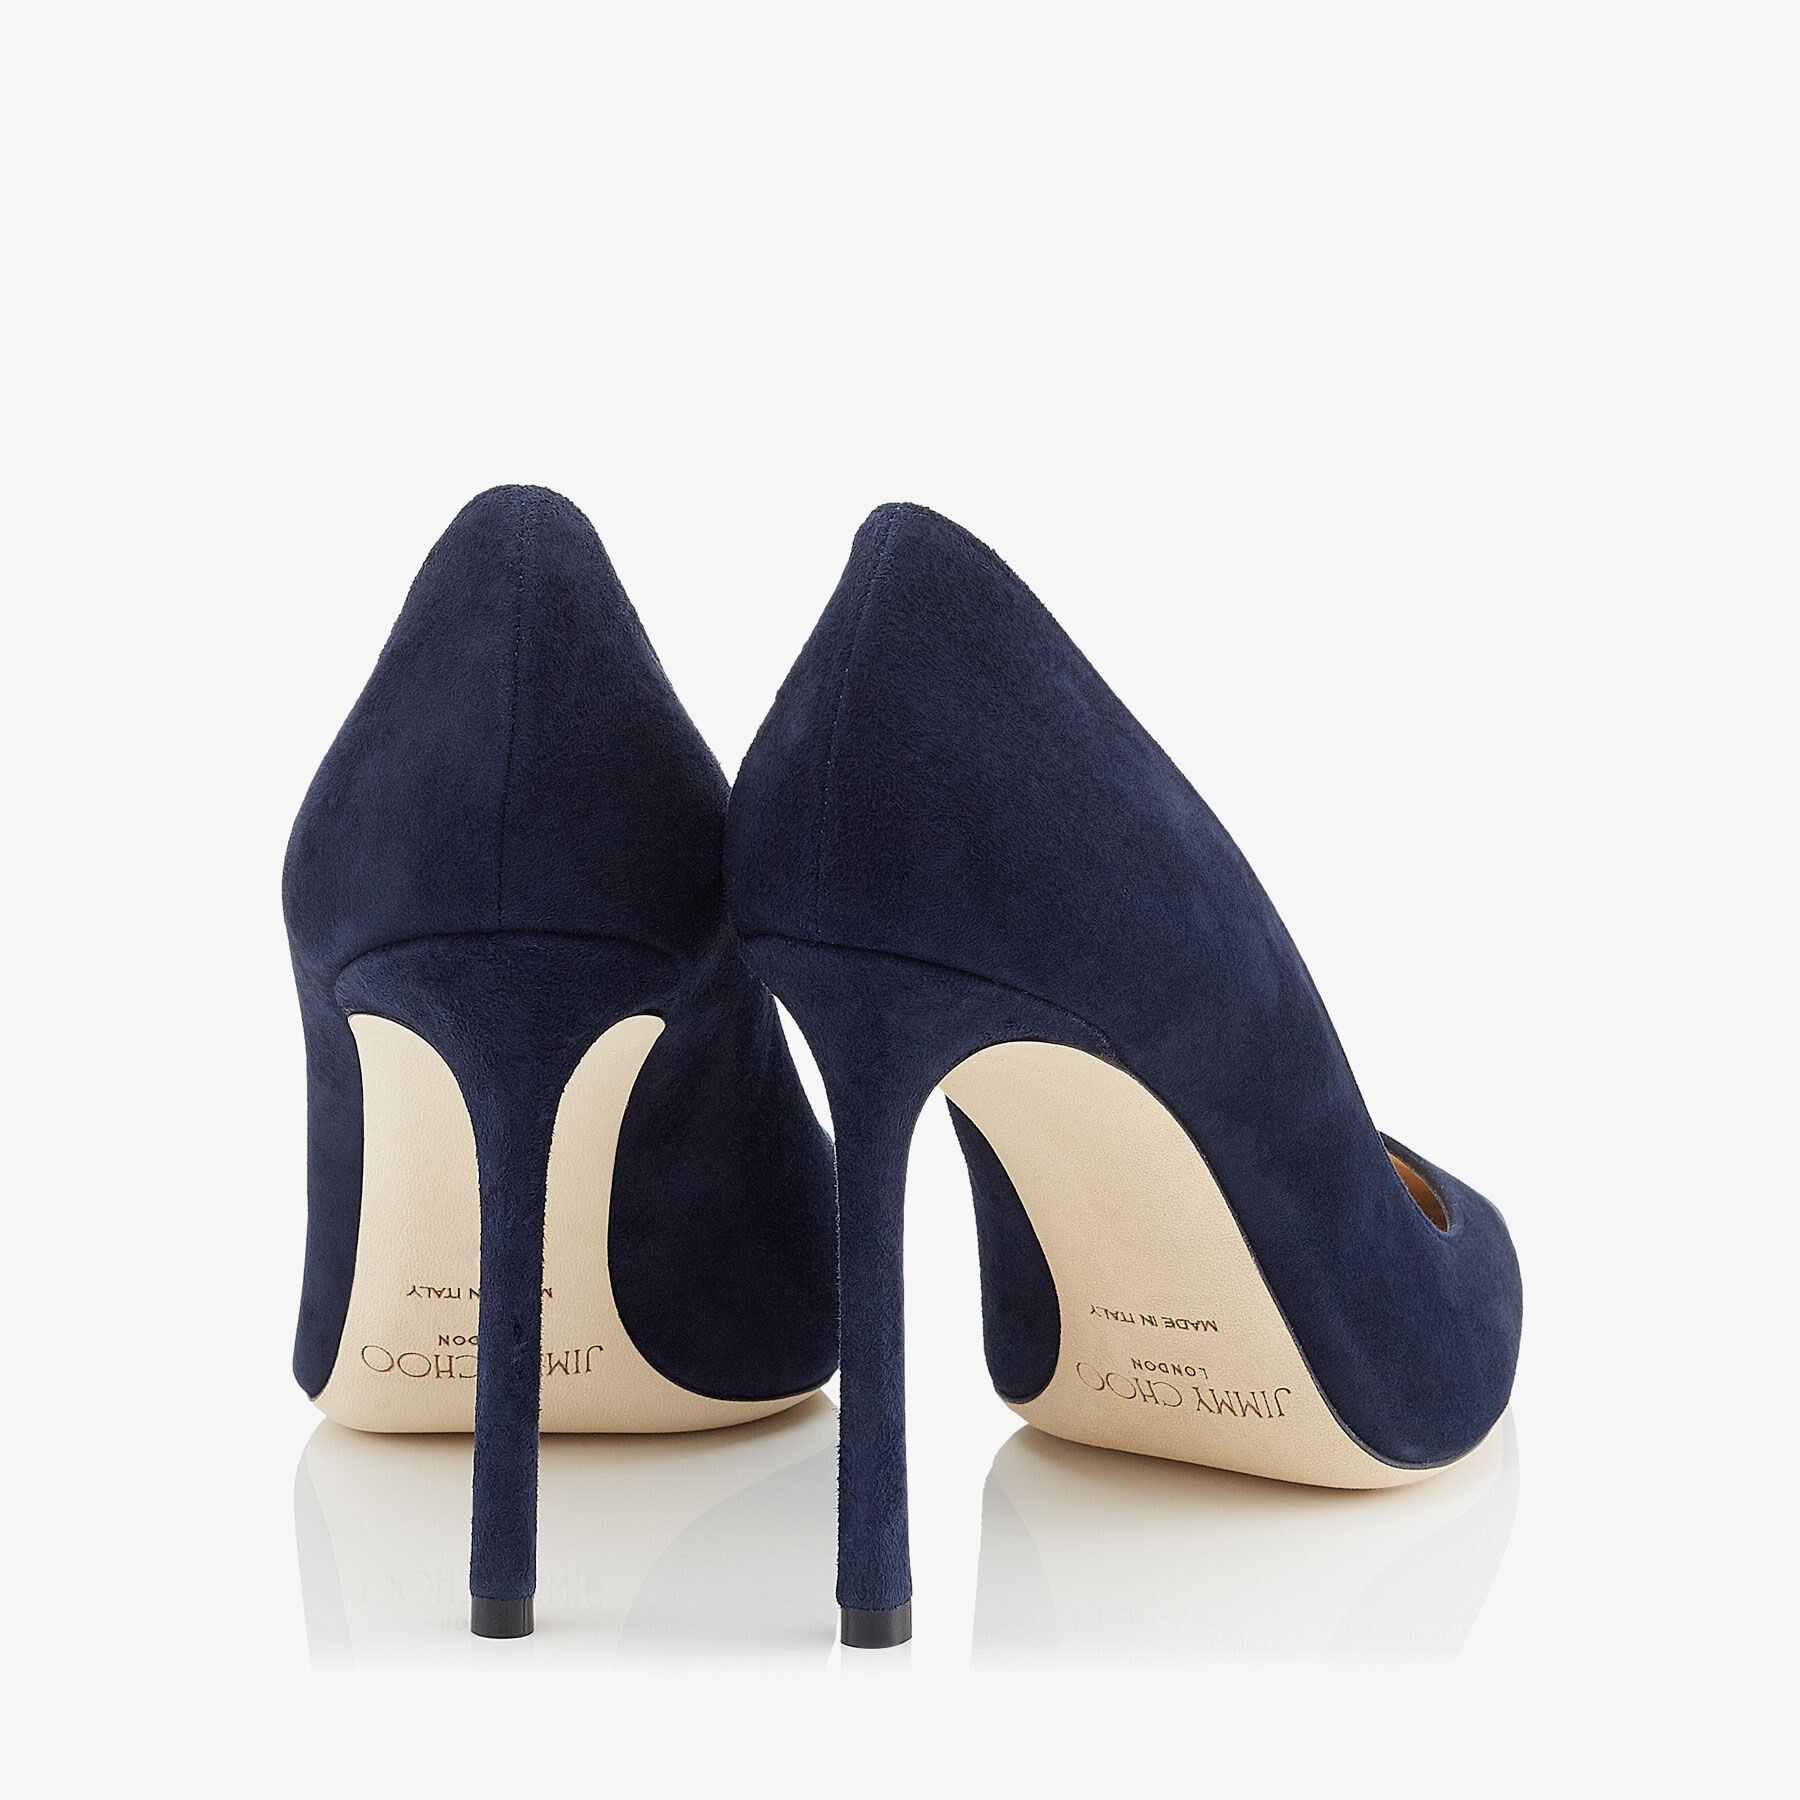 Romy 100
Navy Suede Pointed Pumps - 5